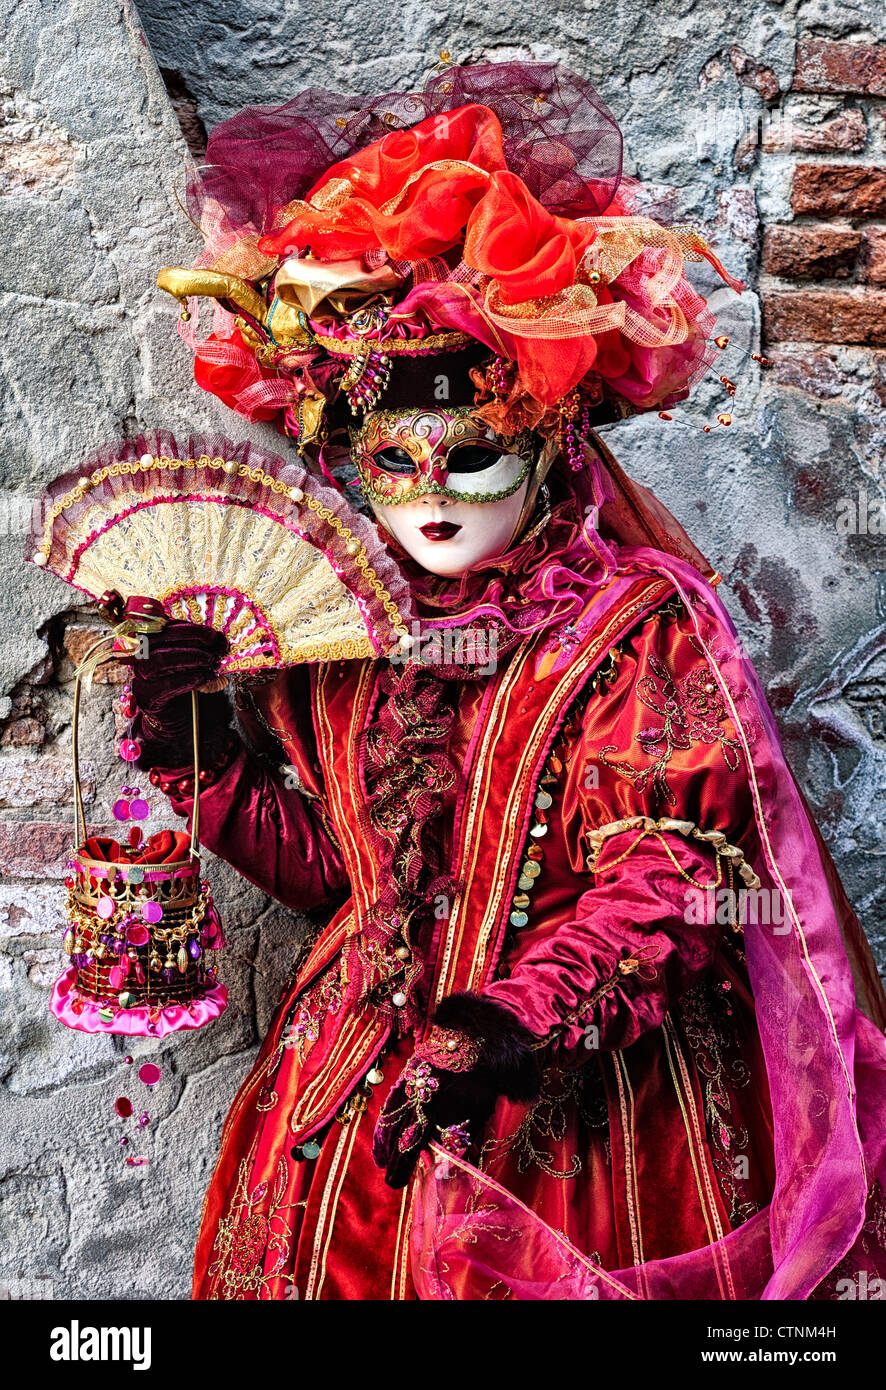 Masked participant during Carnival on Burano Island, Venice Stock Photo